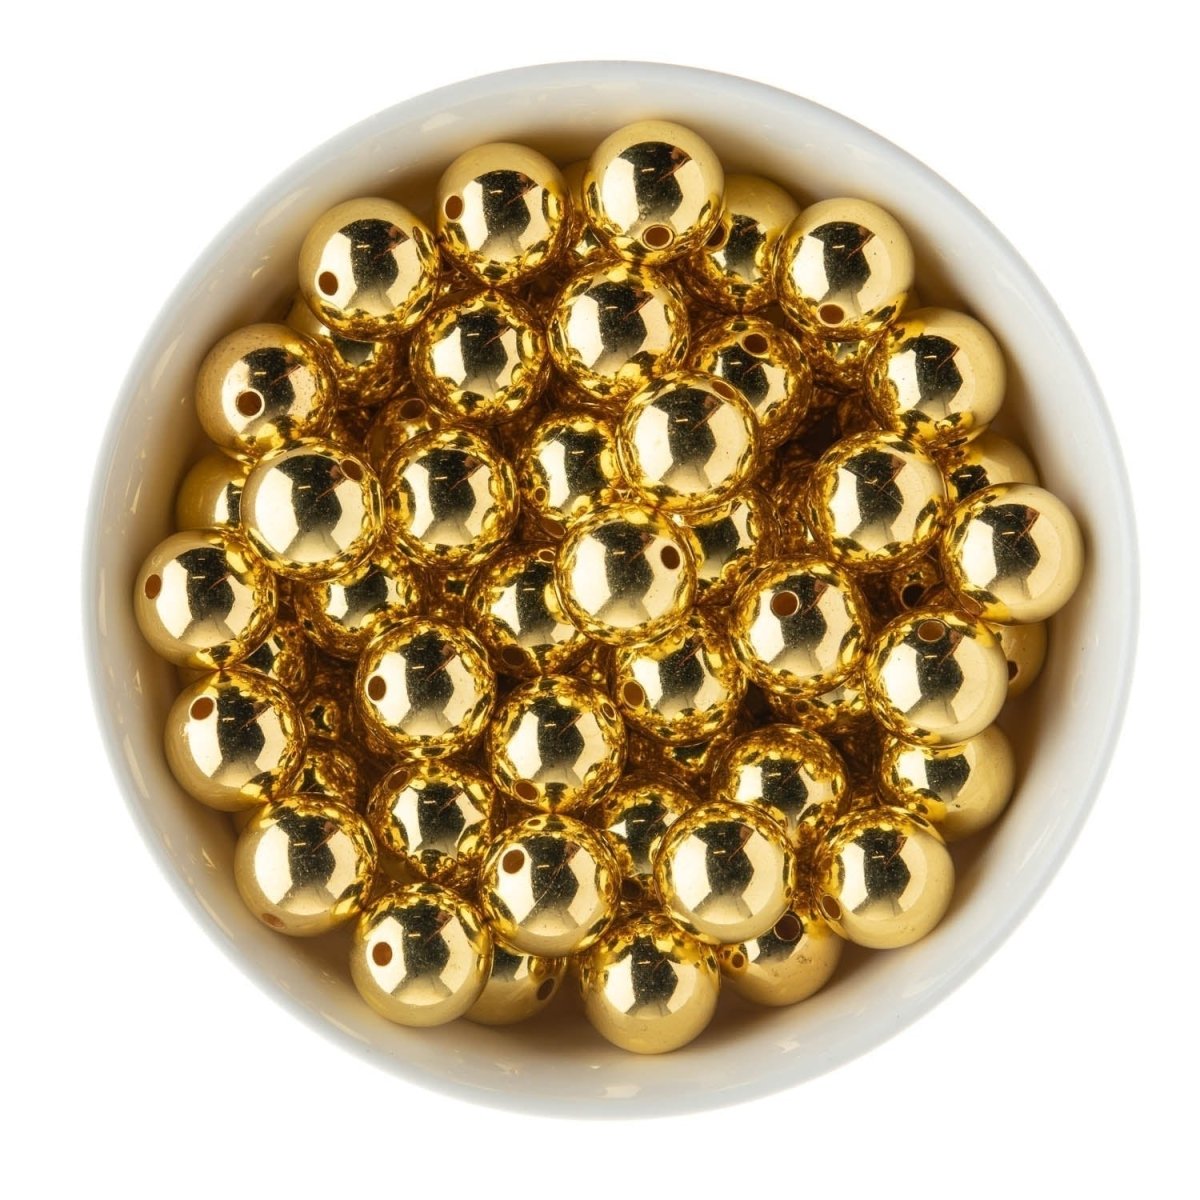 Acrylic Round Beads Metallic 16mm Gold from Cara & Co Craft Supply